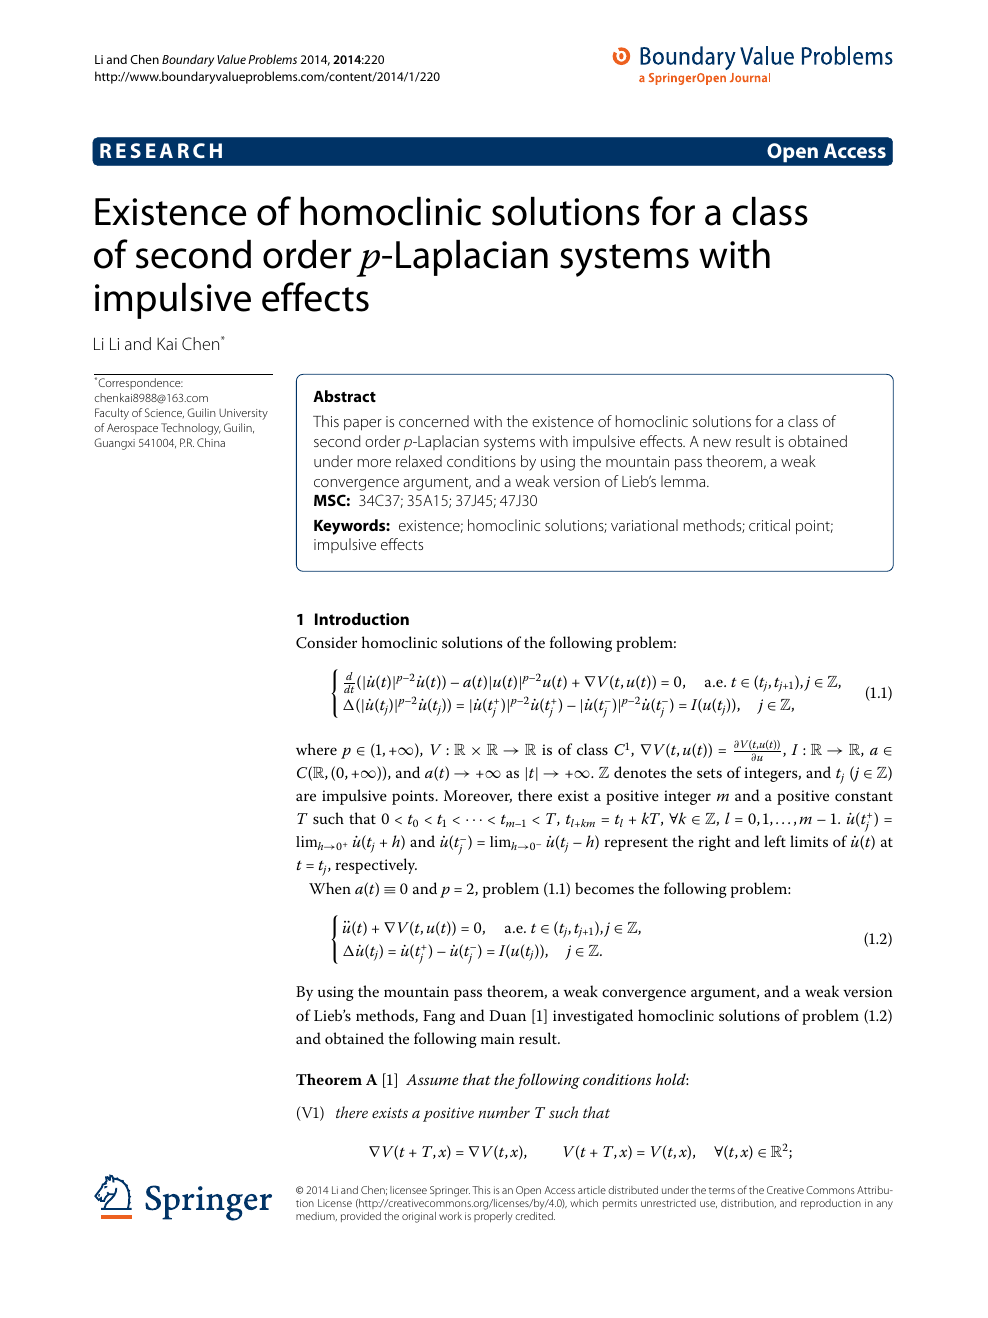 Existence Of Homoclinic Solutions For A Class Of Second Order P Laplacian Systems With Impulsive Effects Topic Of Research Paper In Mathematics Download Scholarly Article Pdf And Read For Free On Cyberleninka